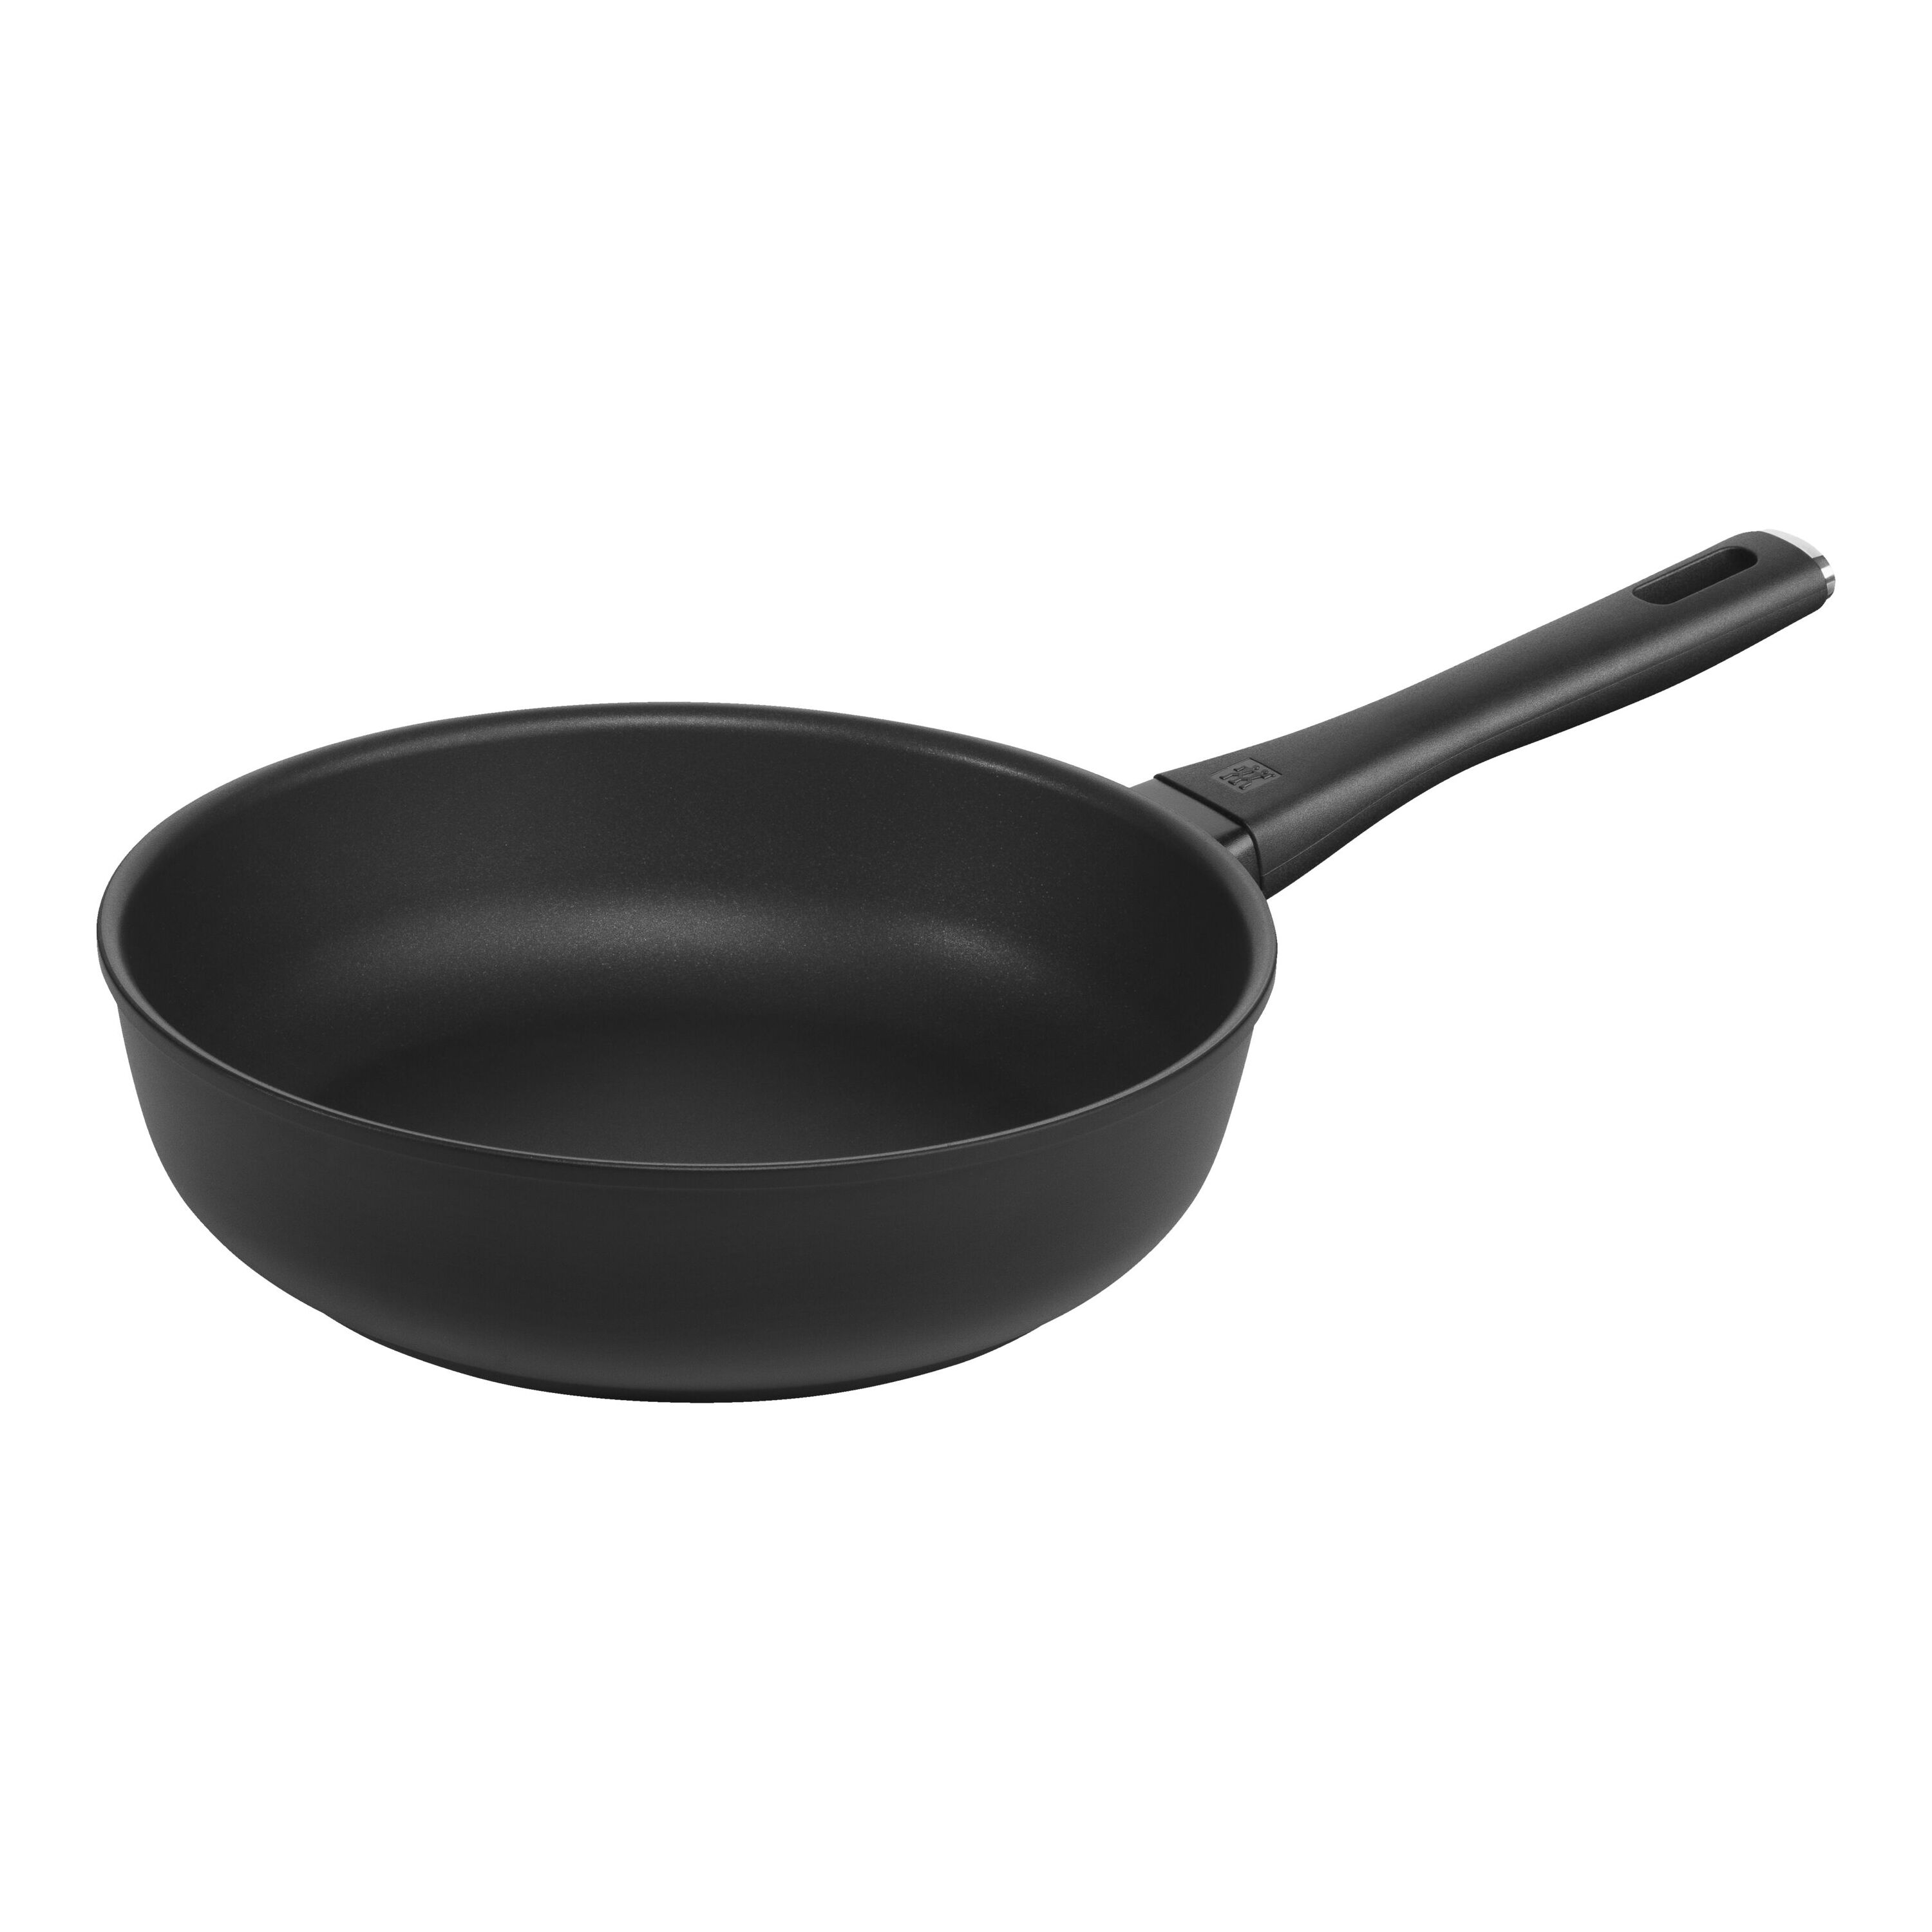 Zwilling Madura Plus Nonstick Fry Pan by Food52 - Dwell